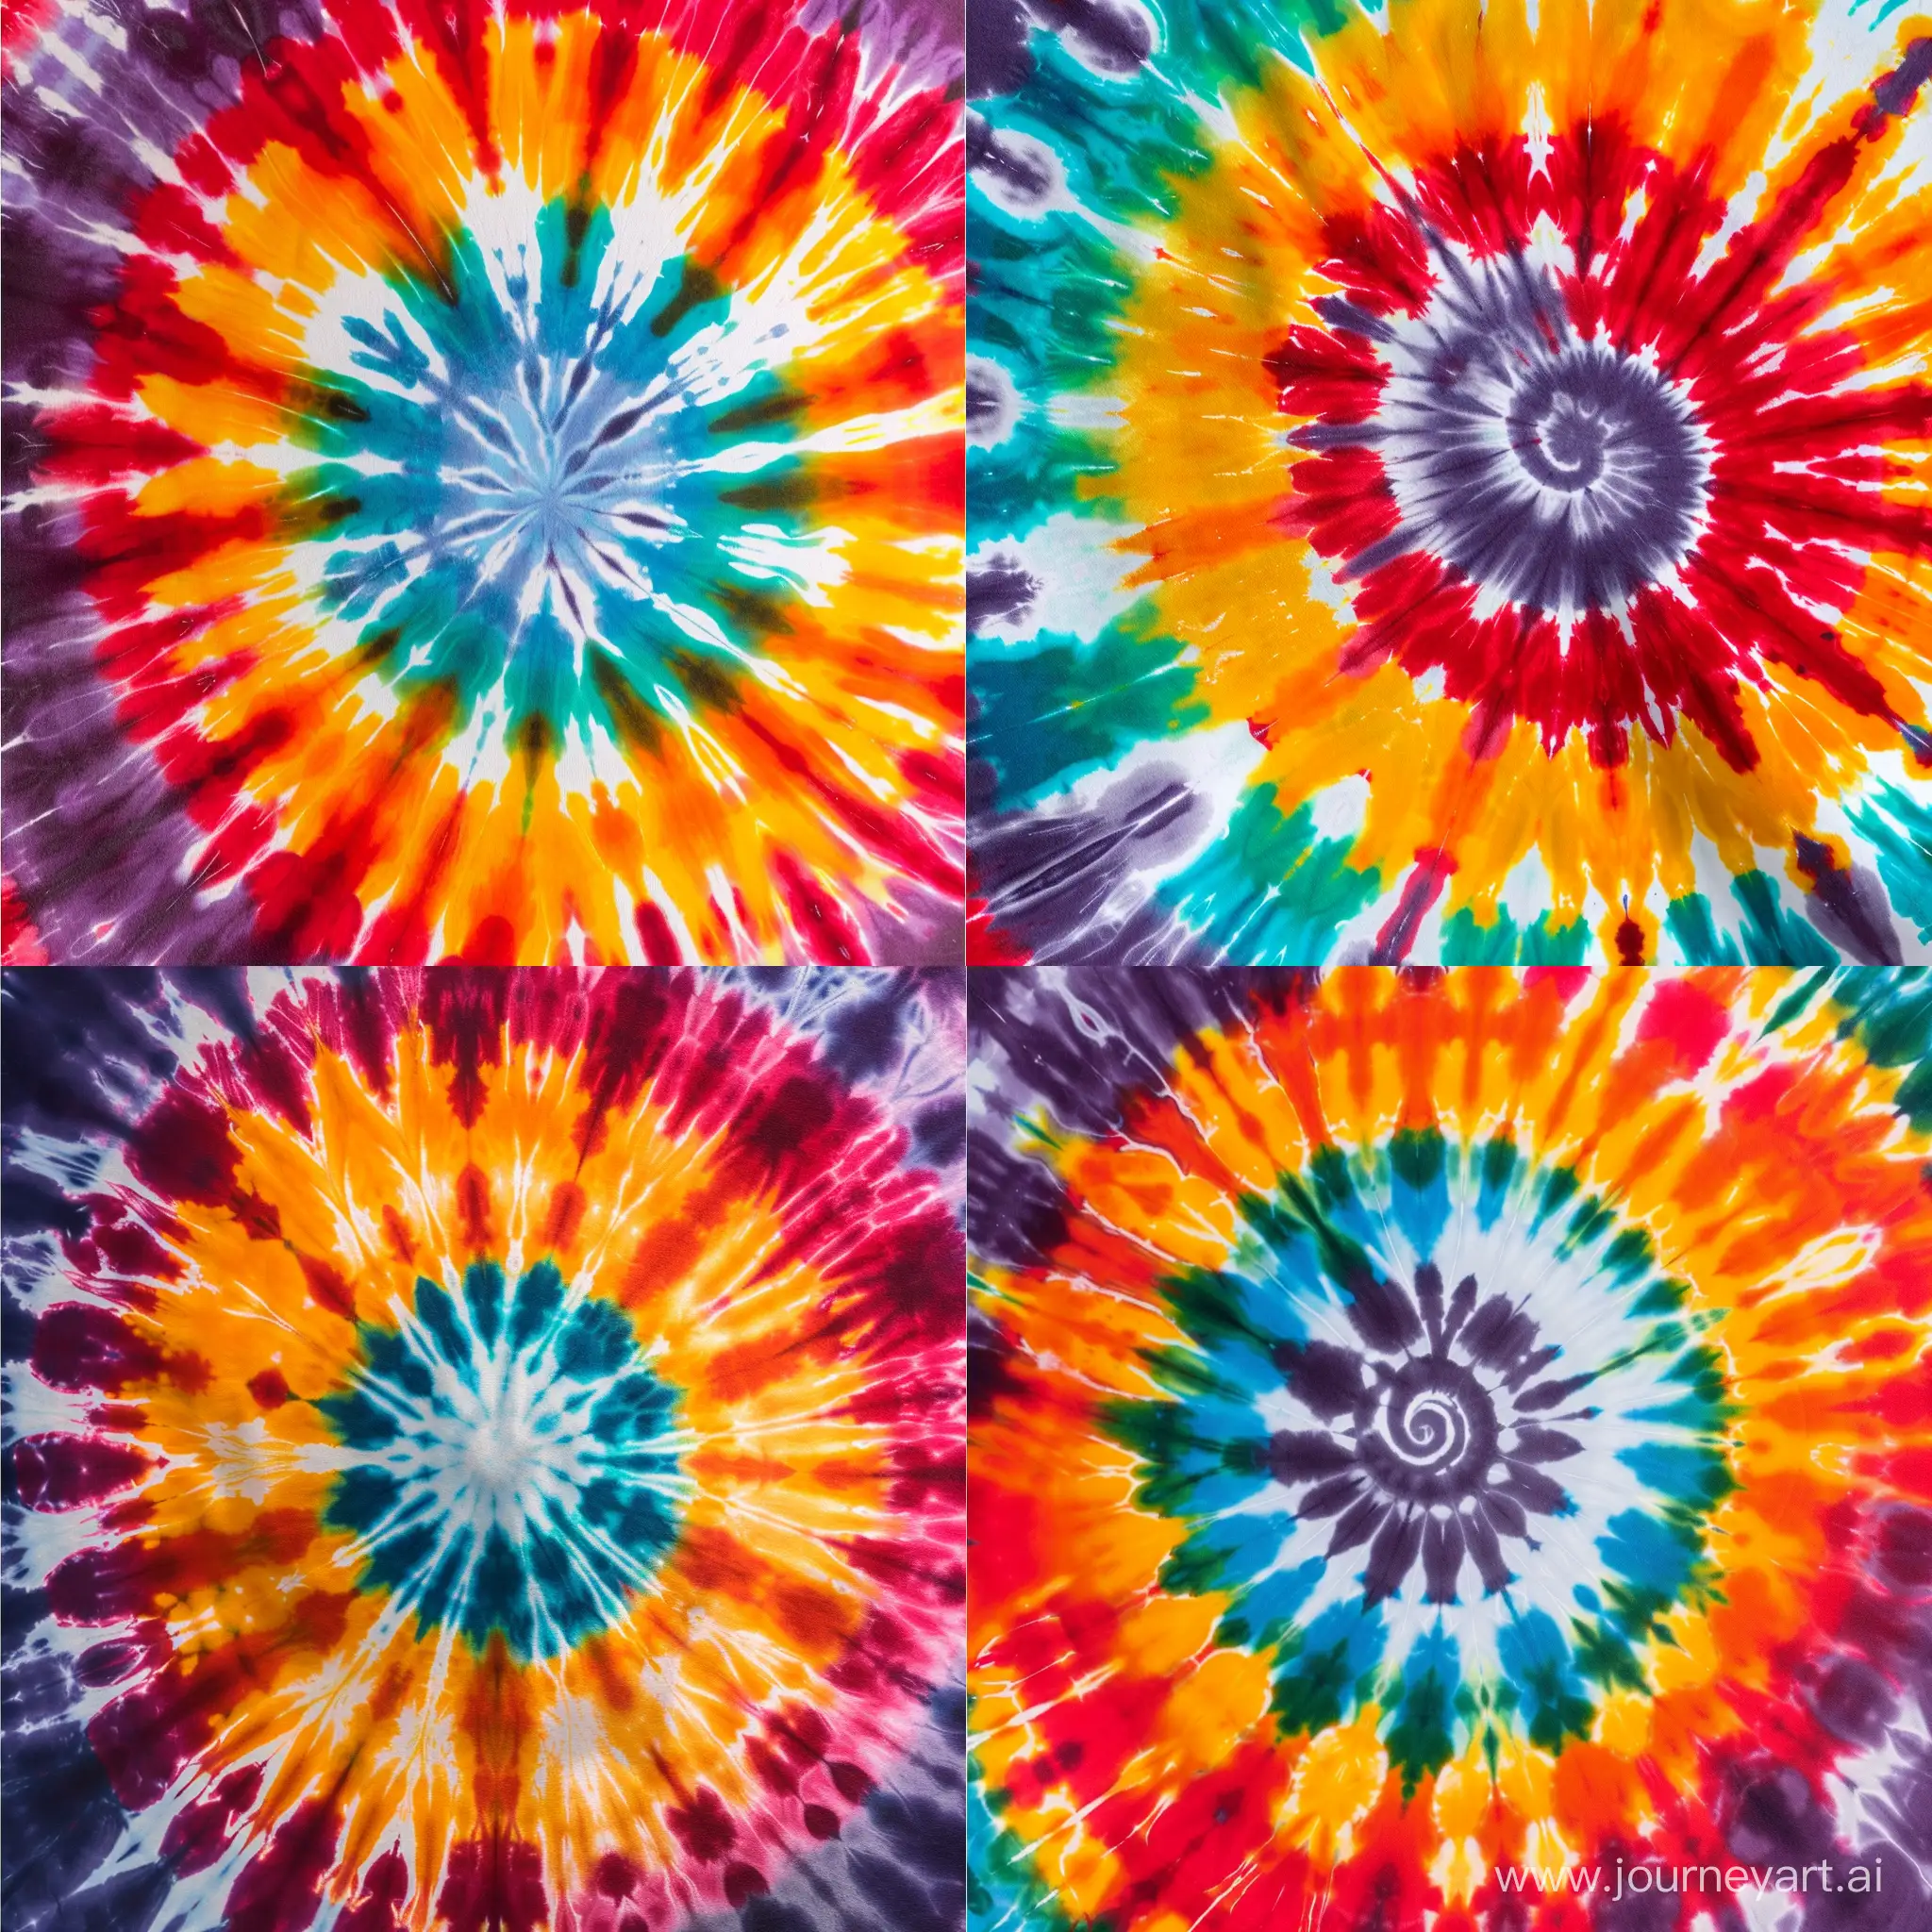 Vibrant-Tie-Dye-Pattern-Colorful-Swirls-Radiating-from-the-Center